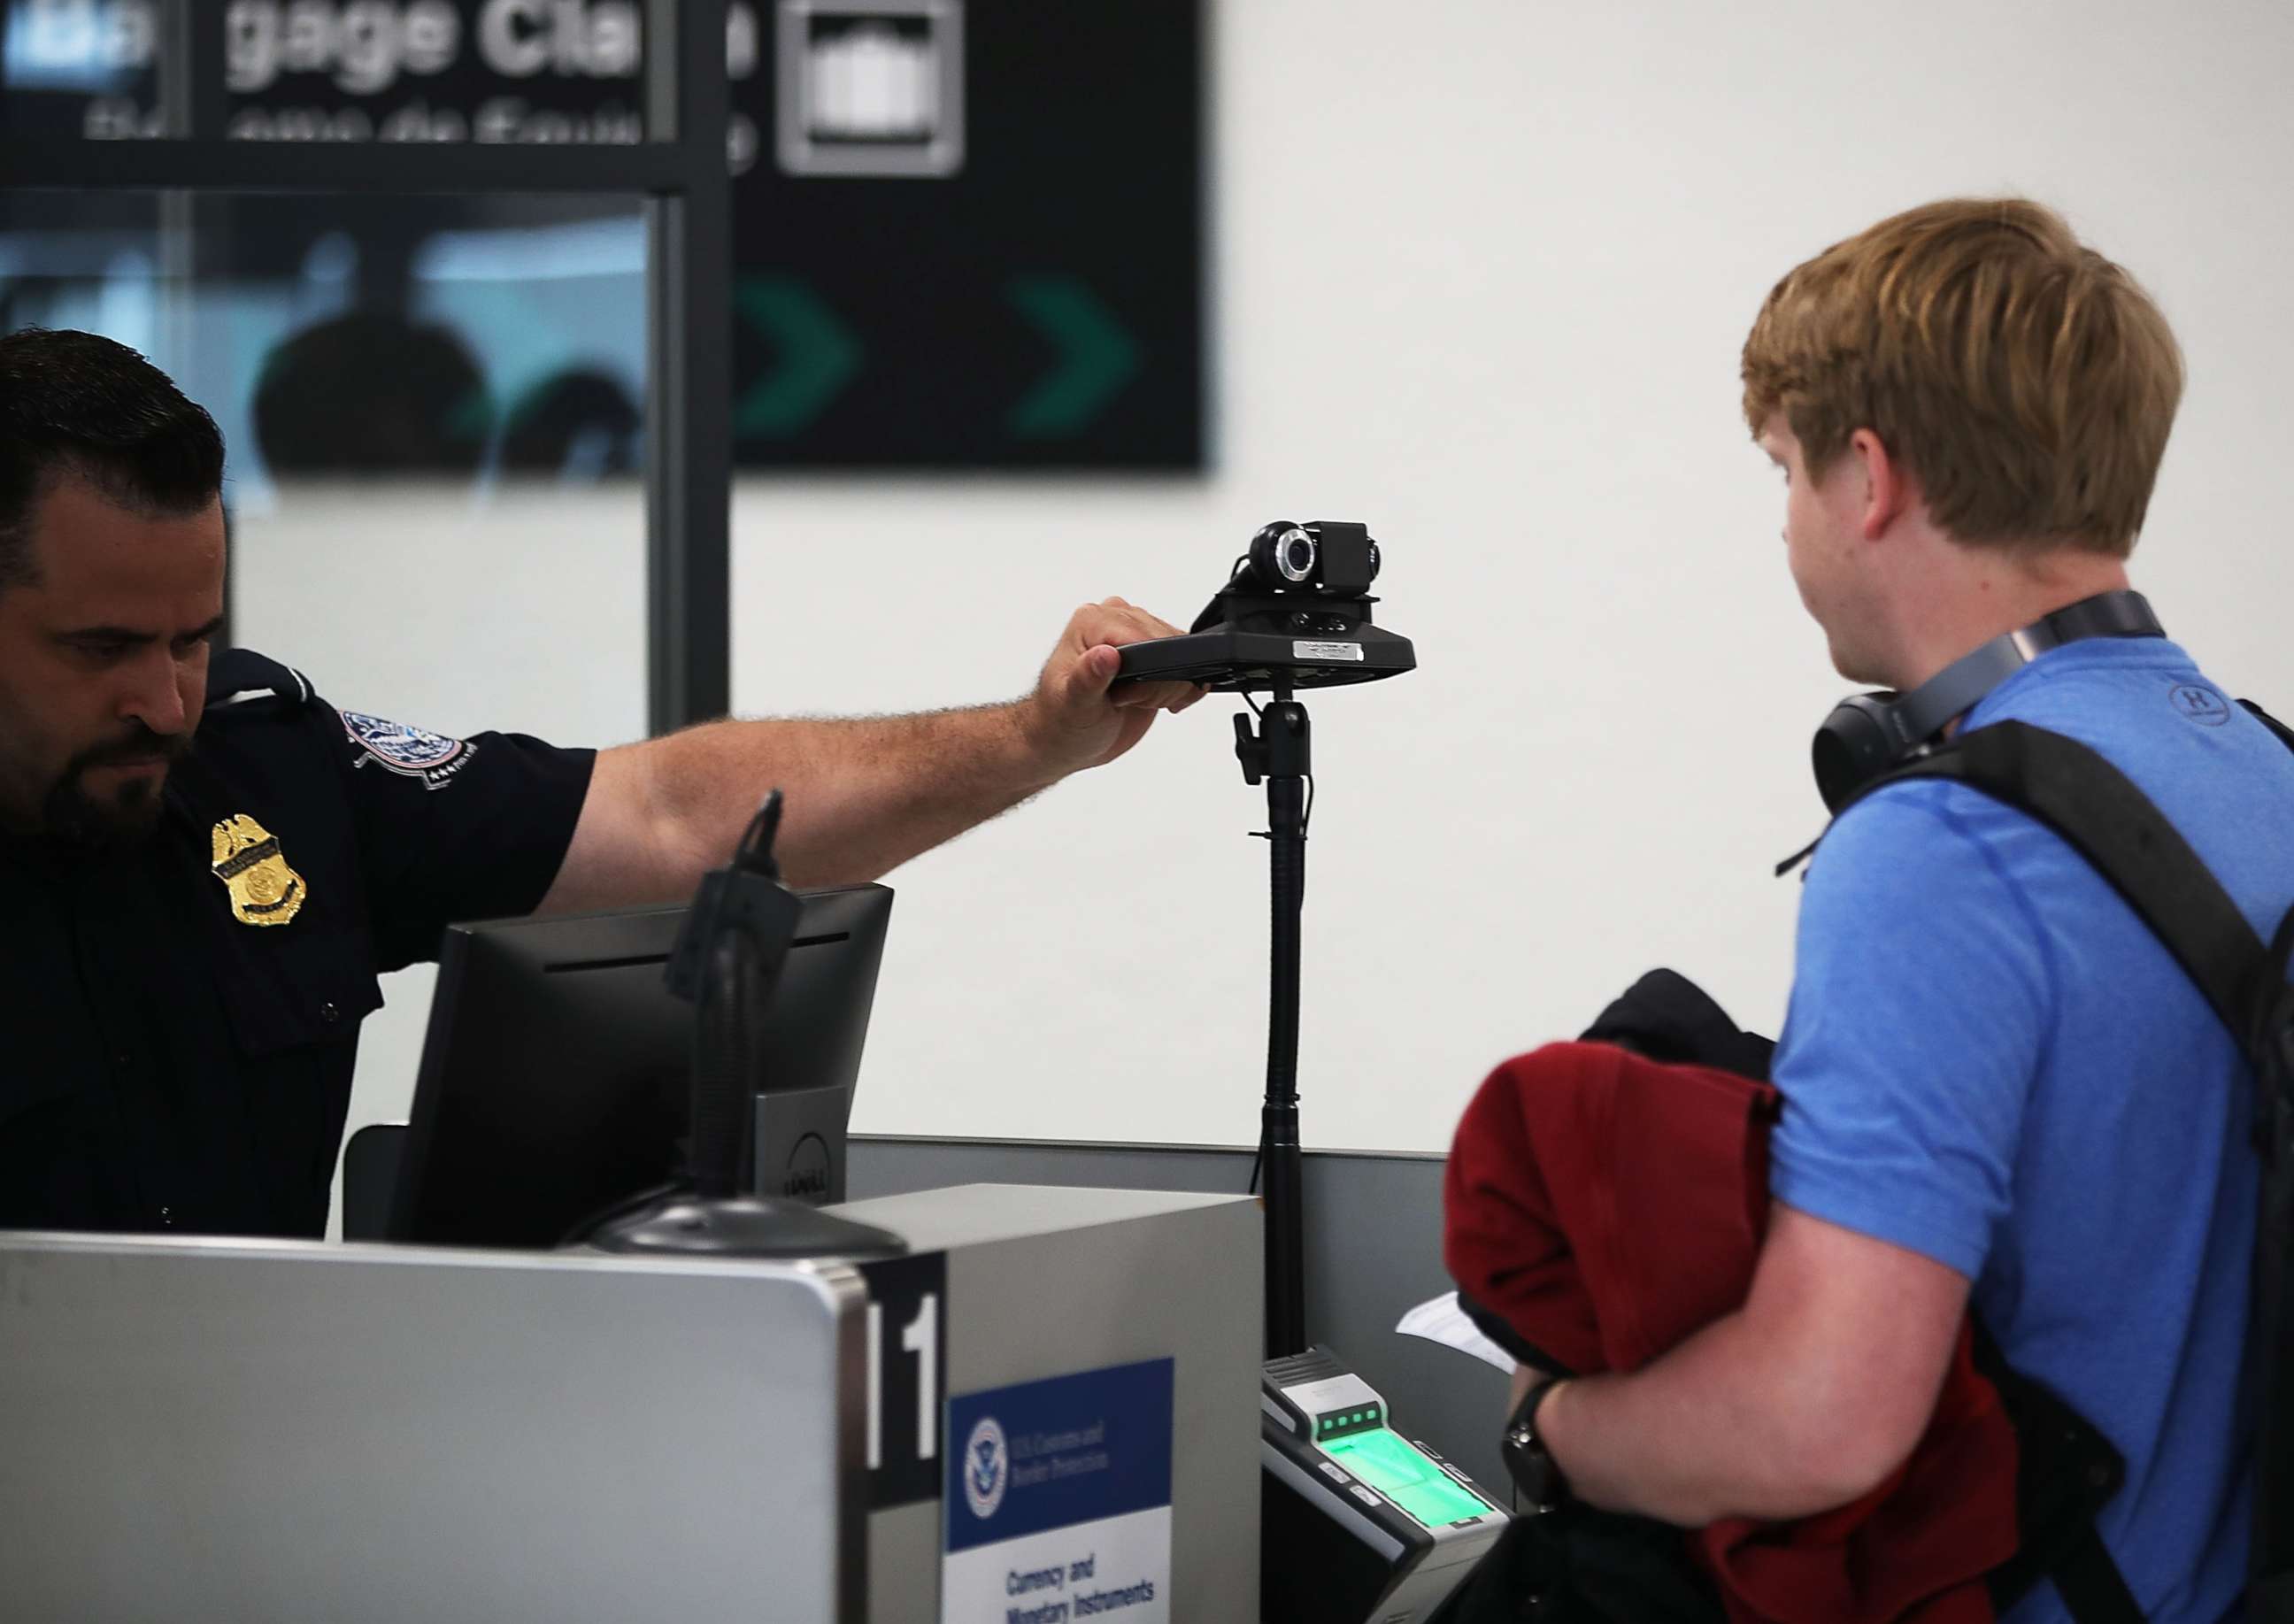 PHOTO: A U.S. Customs and Border Protection officer instructs an international traveler to look into a camera as he uses facial recognition technology to screen a traveler entering the U.S. on Feb. 27, 2018 at Miami International Airport in Miami, Fla.